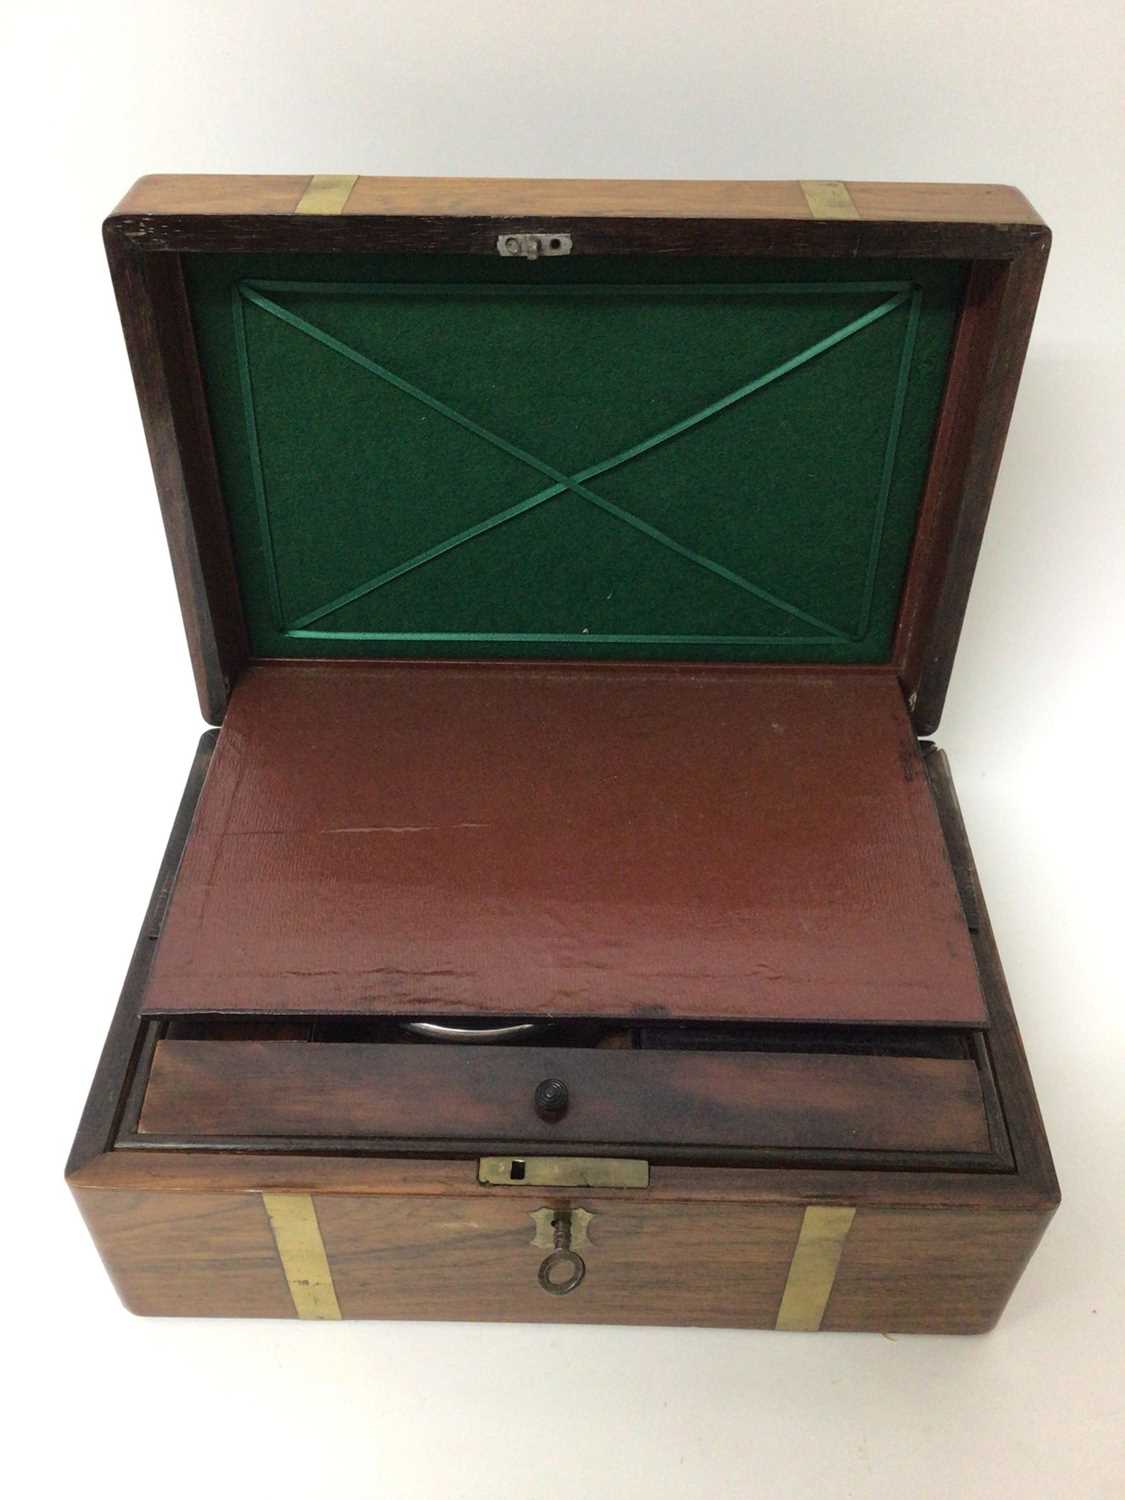 19th century brass bound rosewood writing box with fitted interior - Image 6 of 6